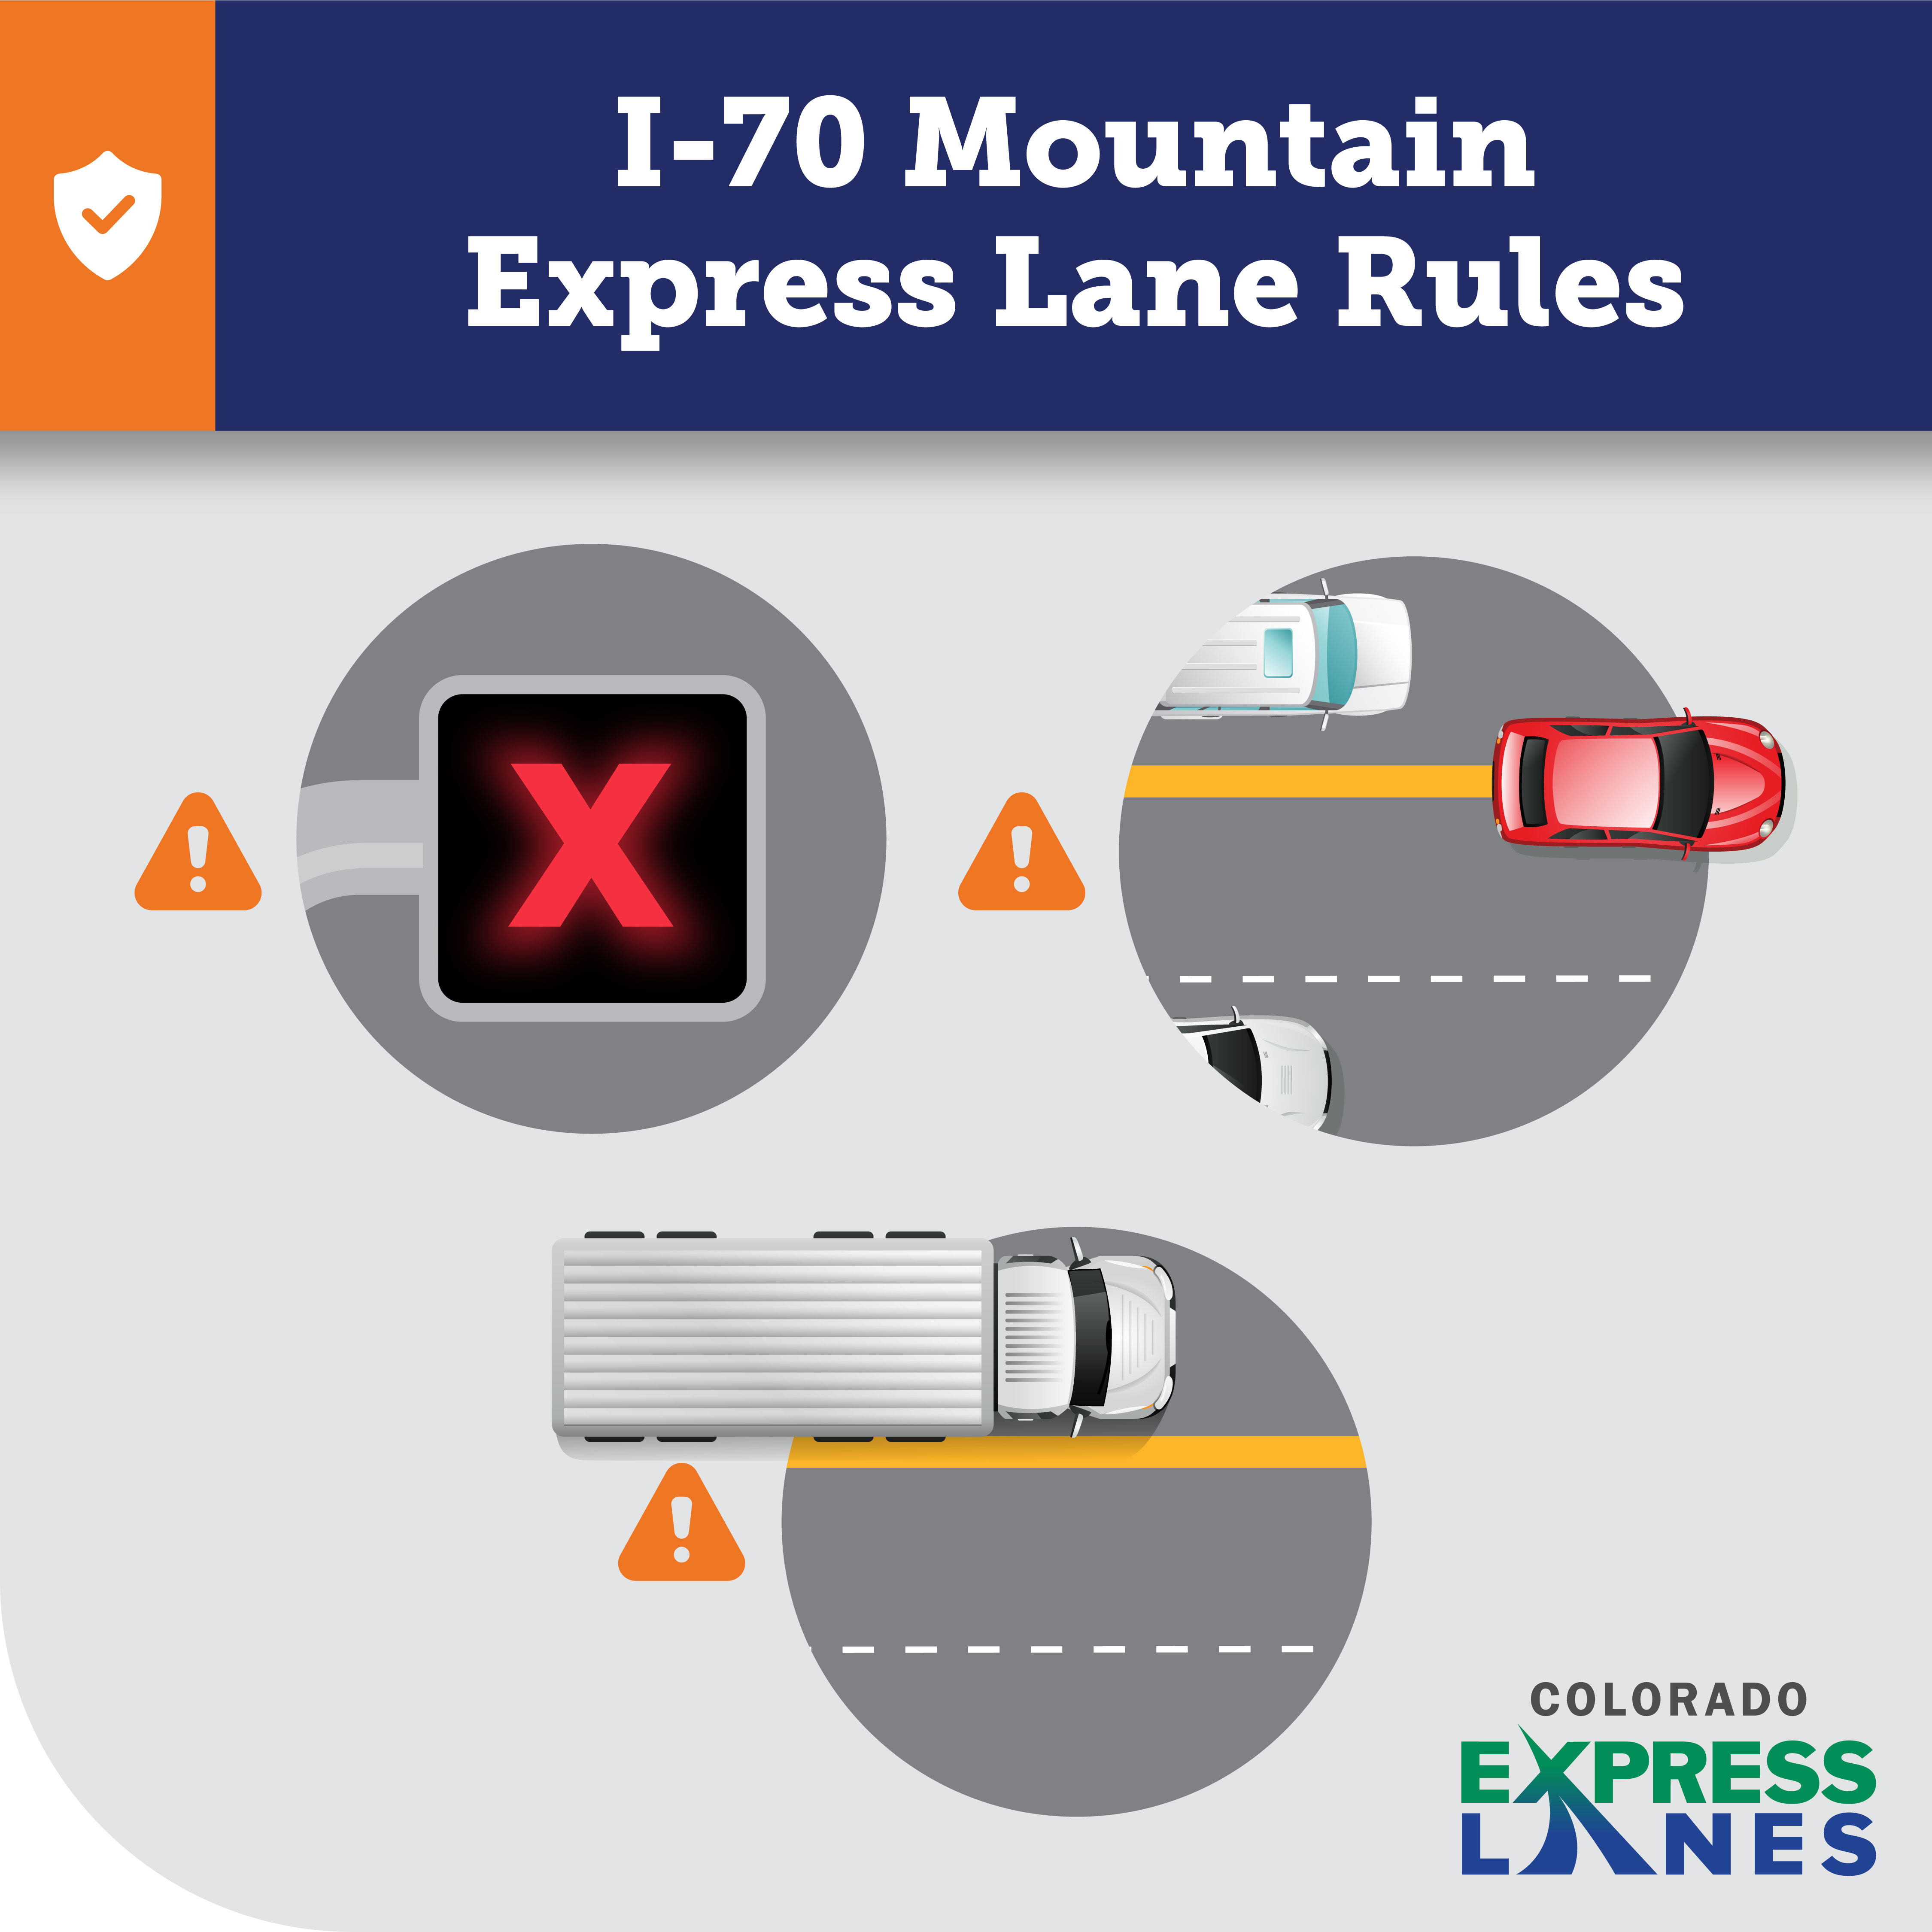 I-70 Mountain Express Lanes Rules Graphic detail image